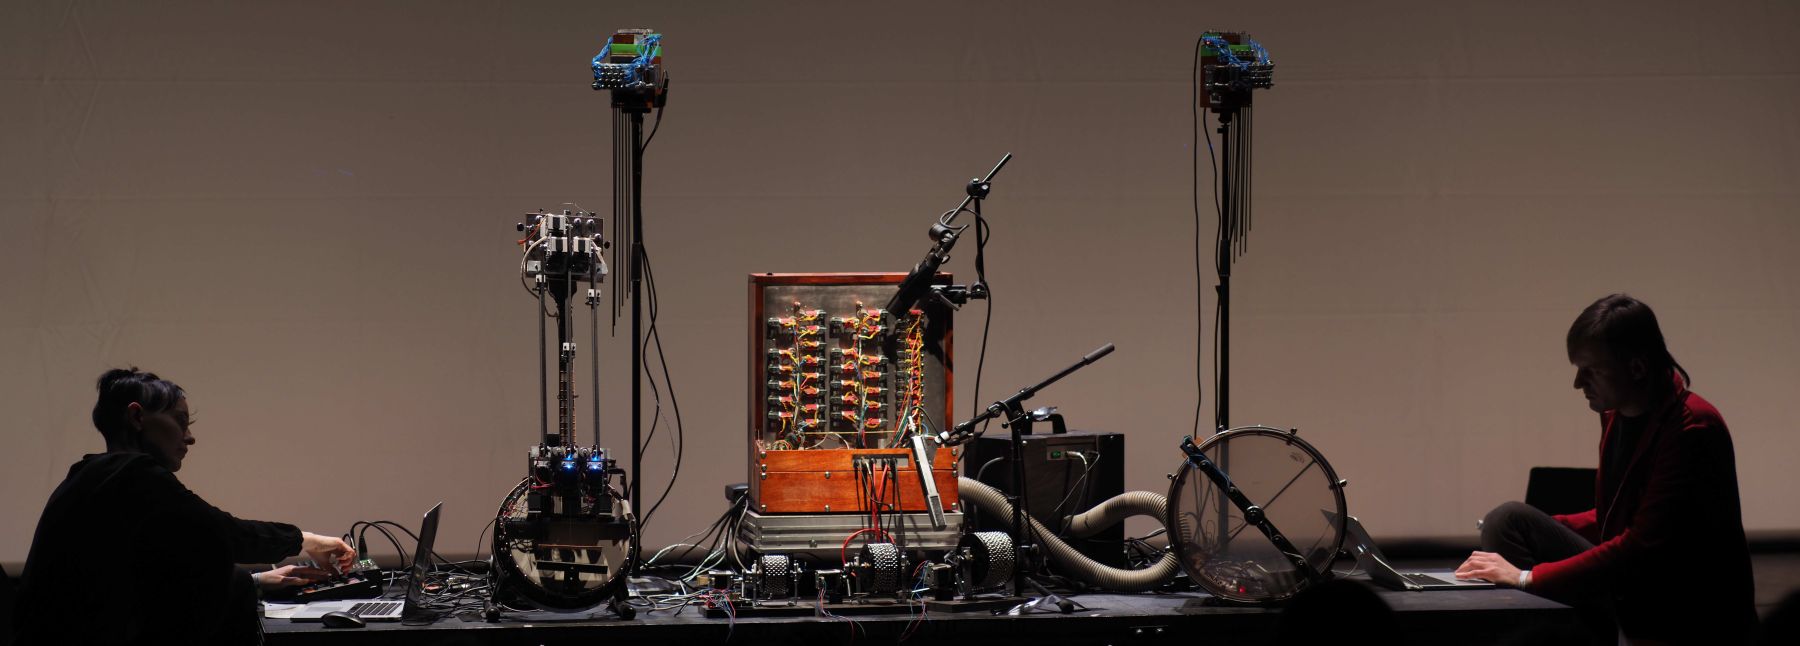 Perfomamnce of Gamut Inc with their instruments at HAU2 Berlin